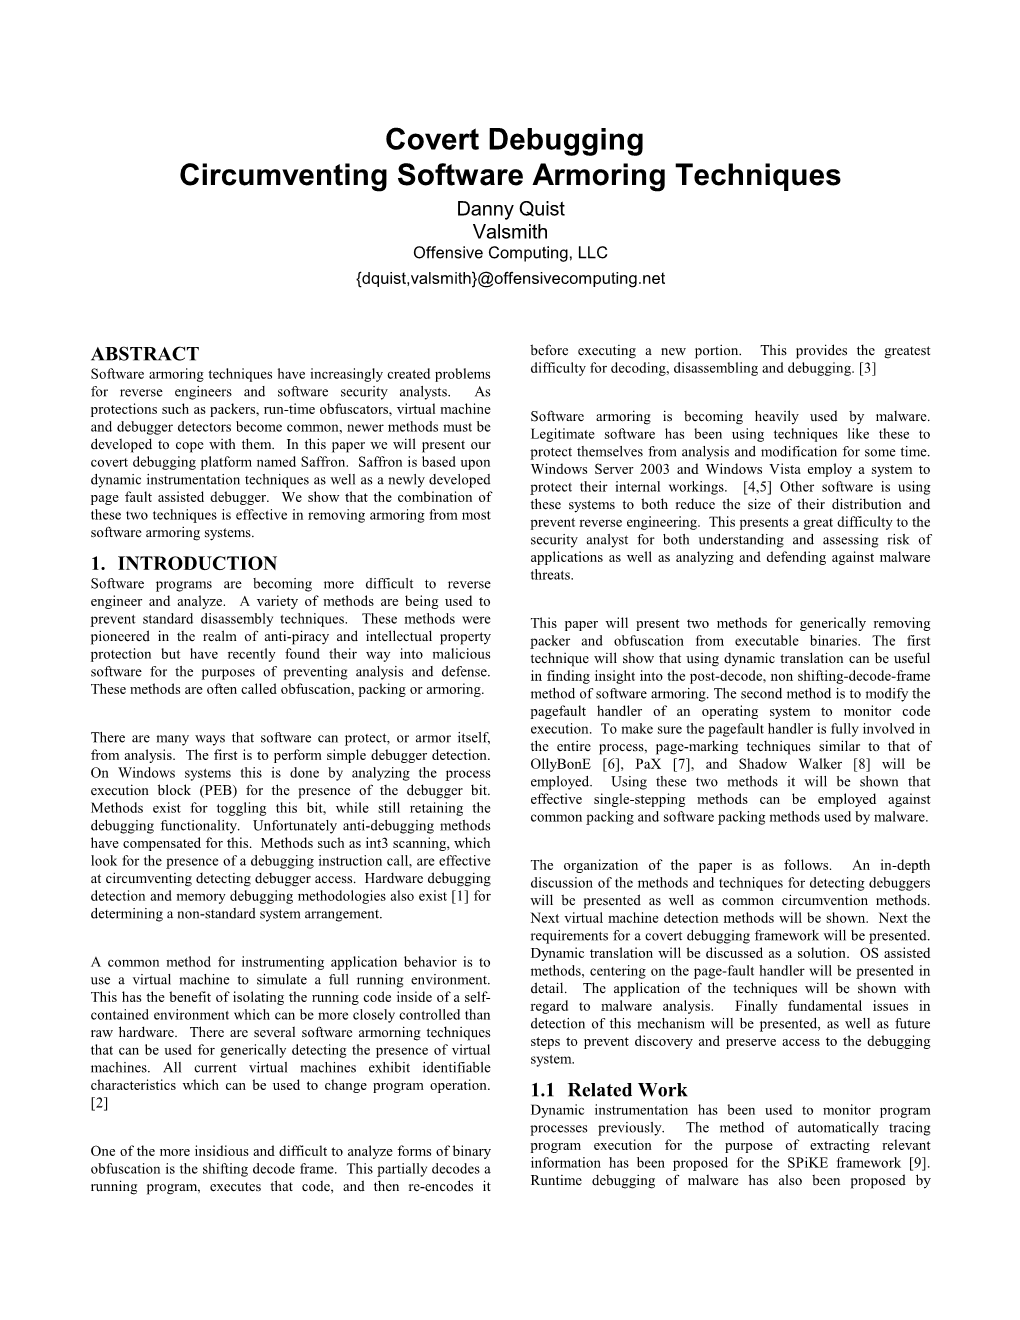 Covert Debugging Circumventing Software Armoring Techniques Danny Quist Valsmith Offensive Computing, LLC {Dquist,Valsmith}@Offensivecomputing.Net